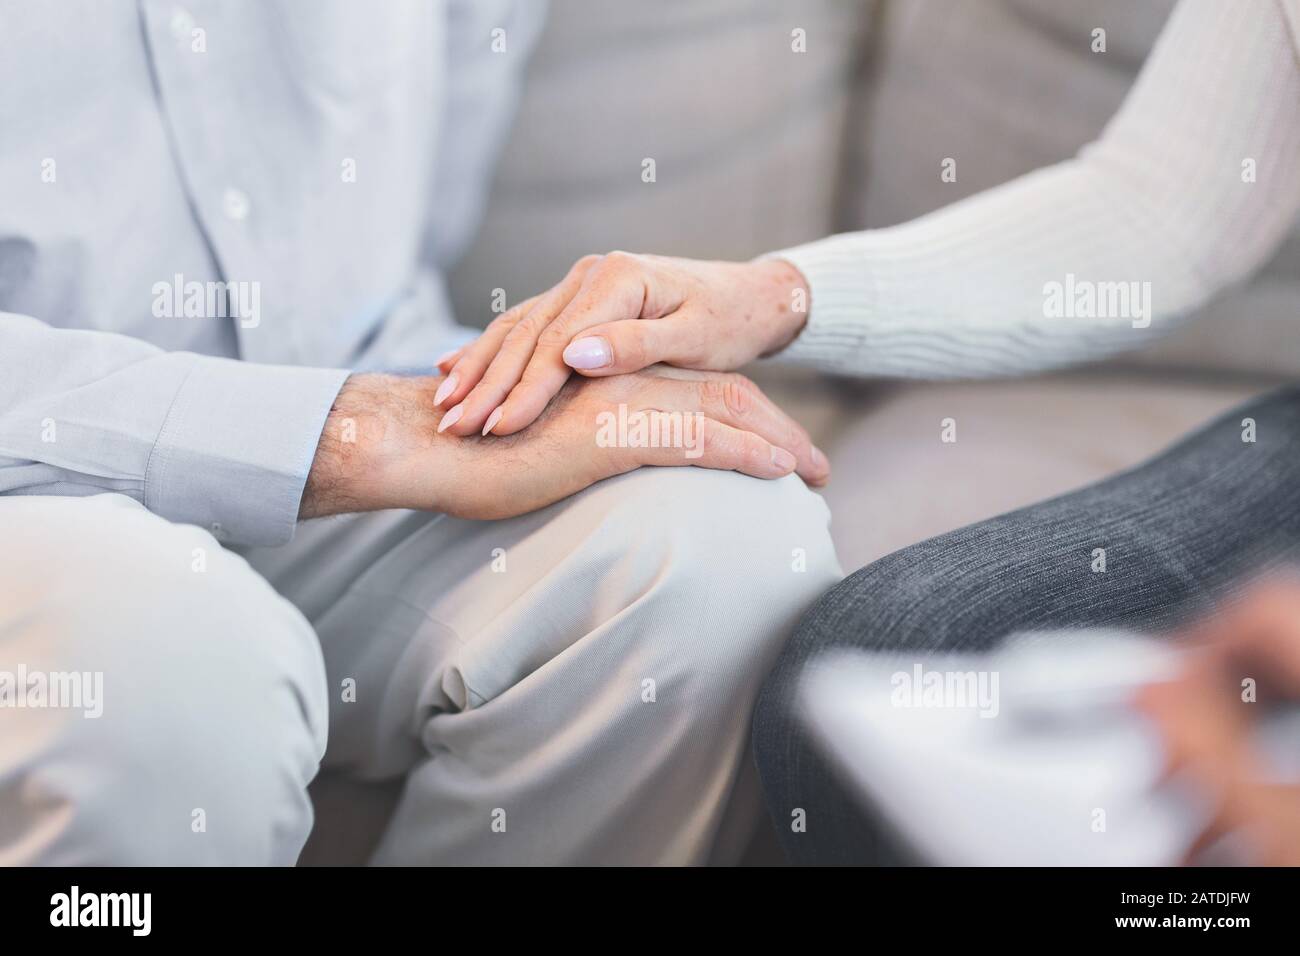 Unrecognizable elderly couple holding hands at session Stock Photo